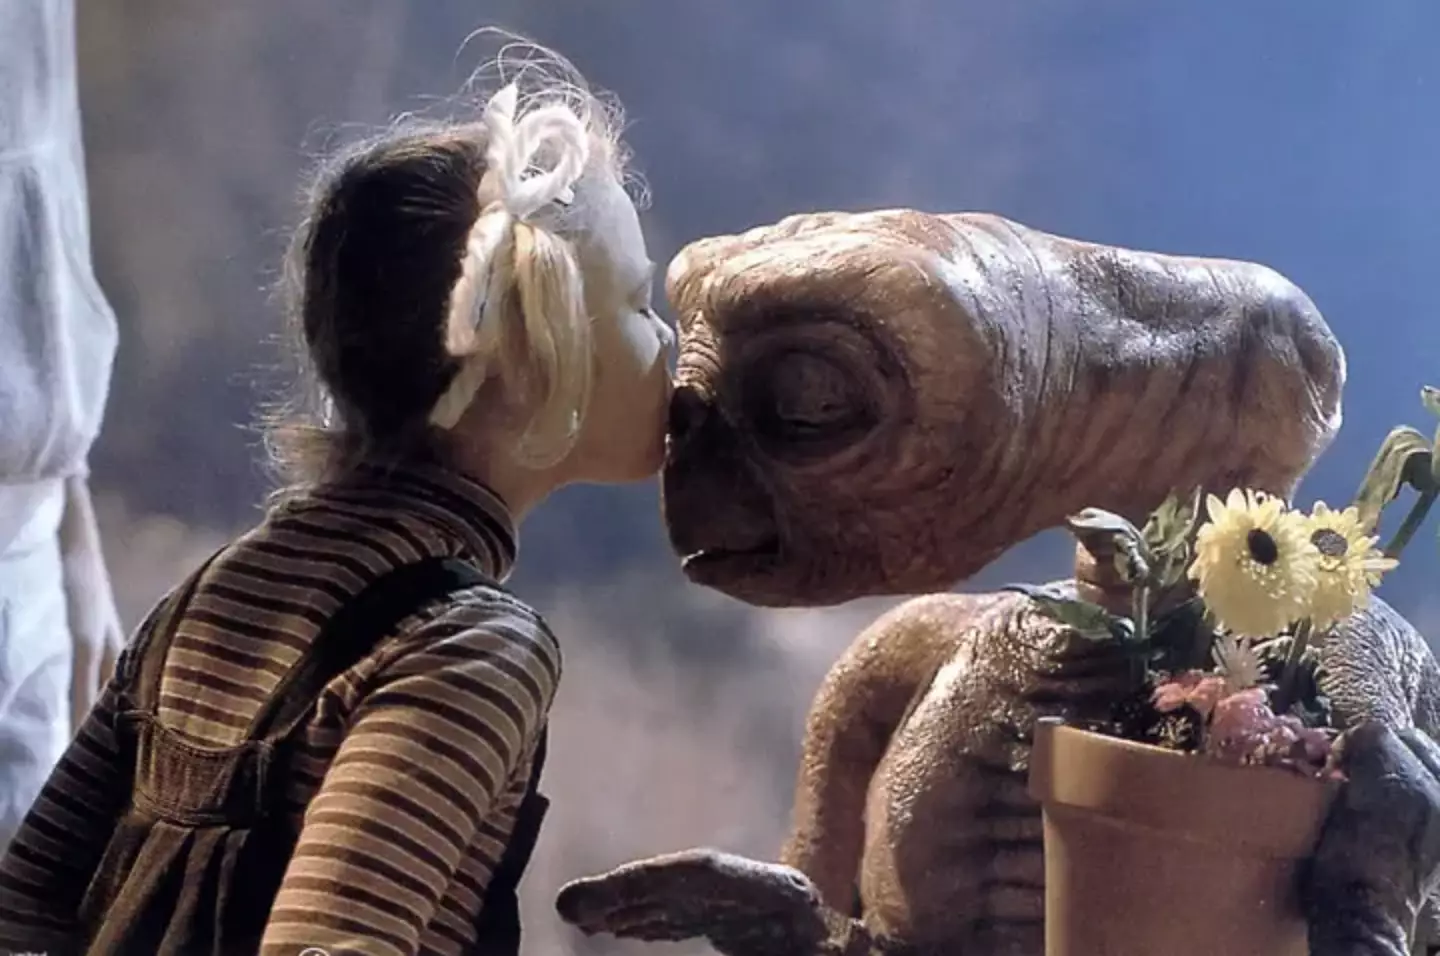 The actor believed E.T. was real during filming.